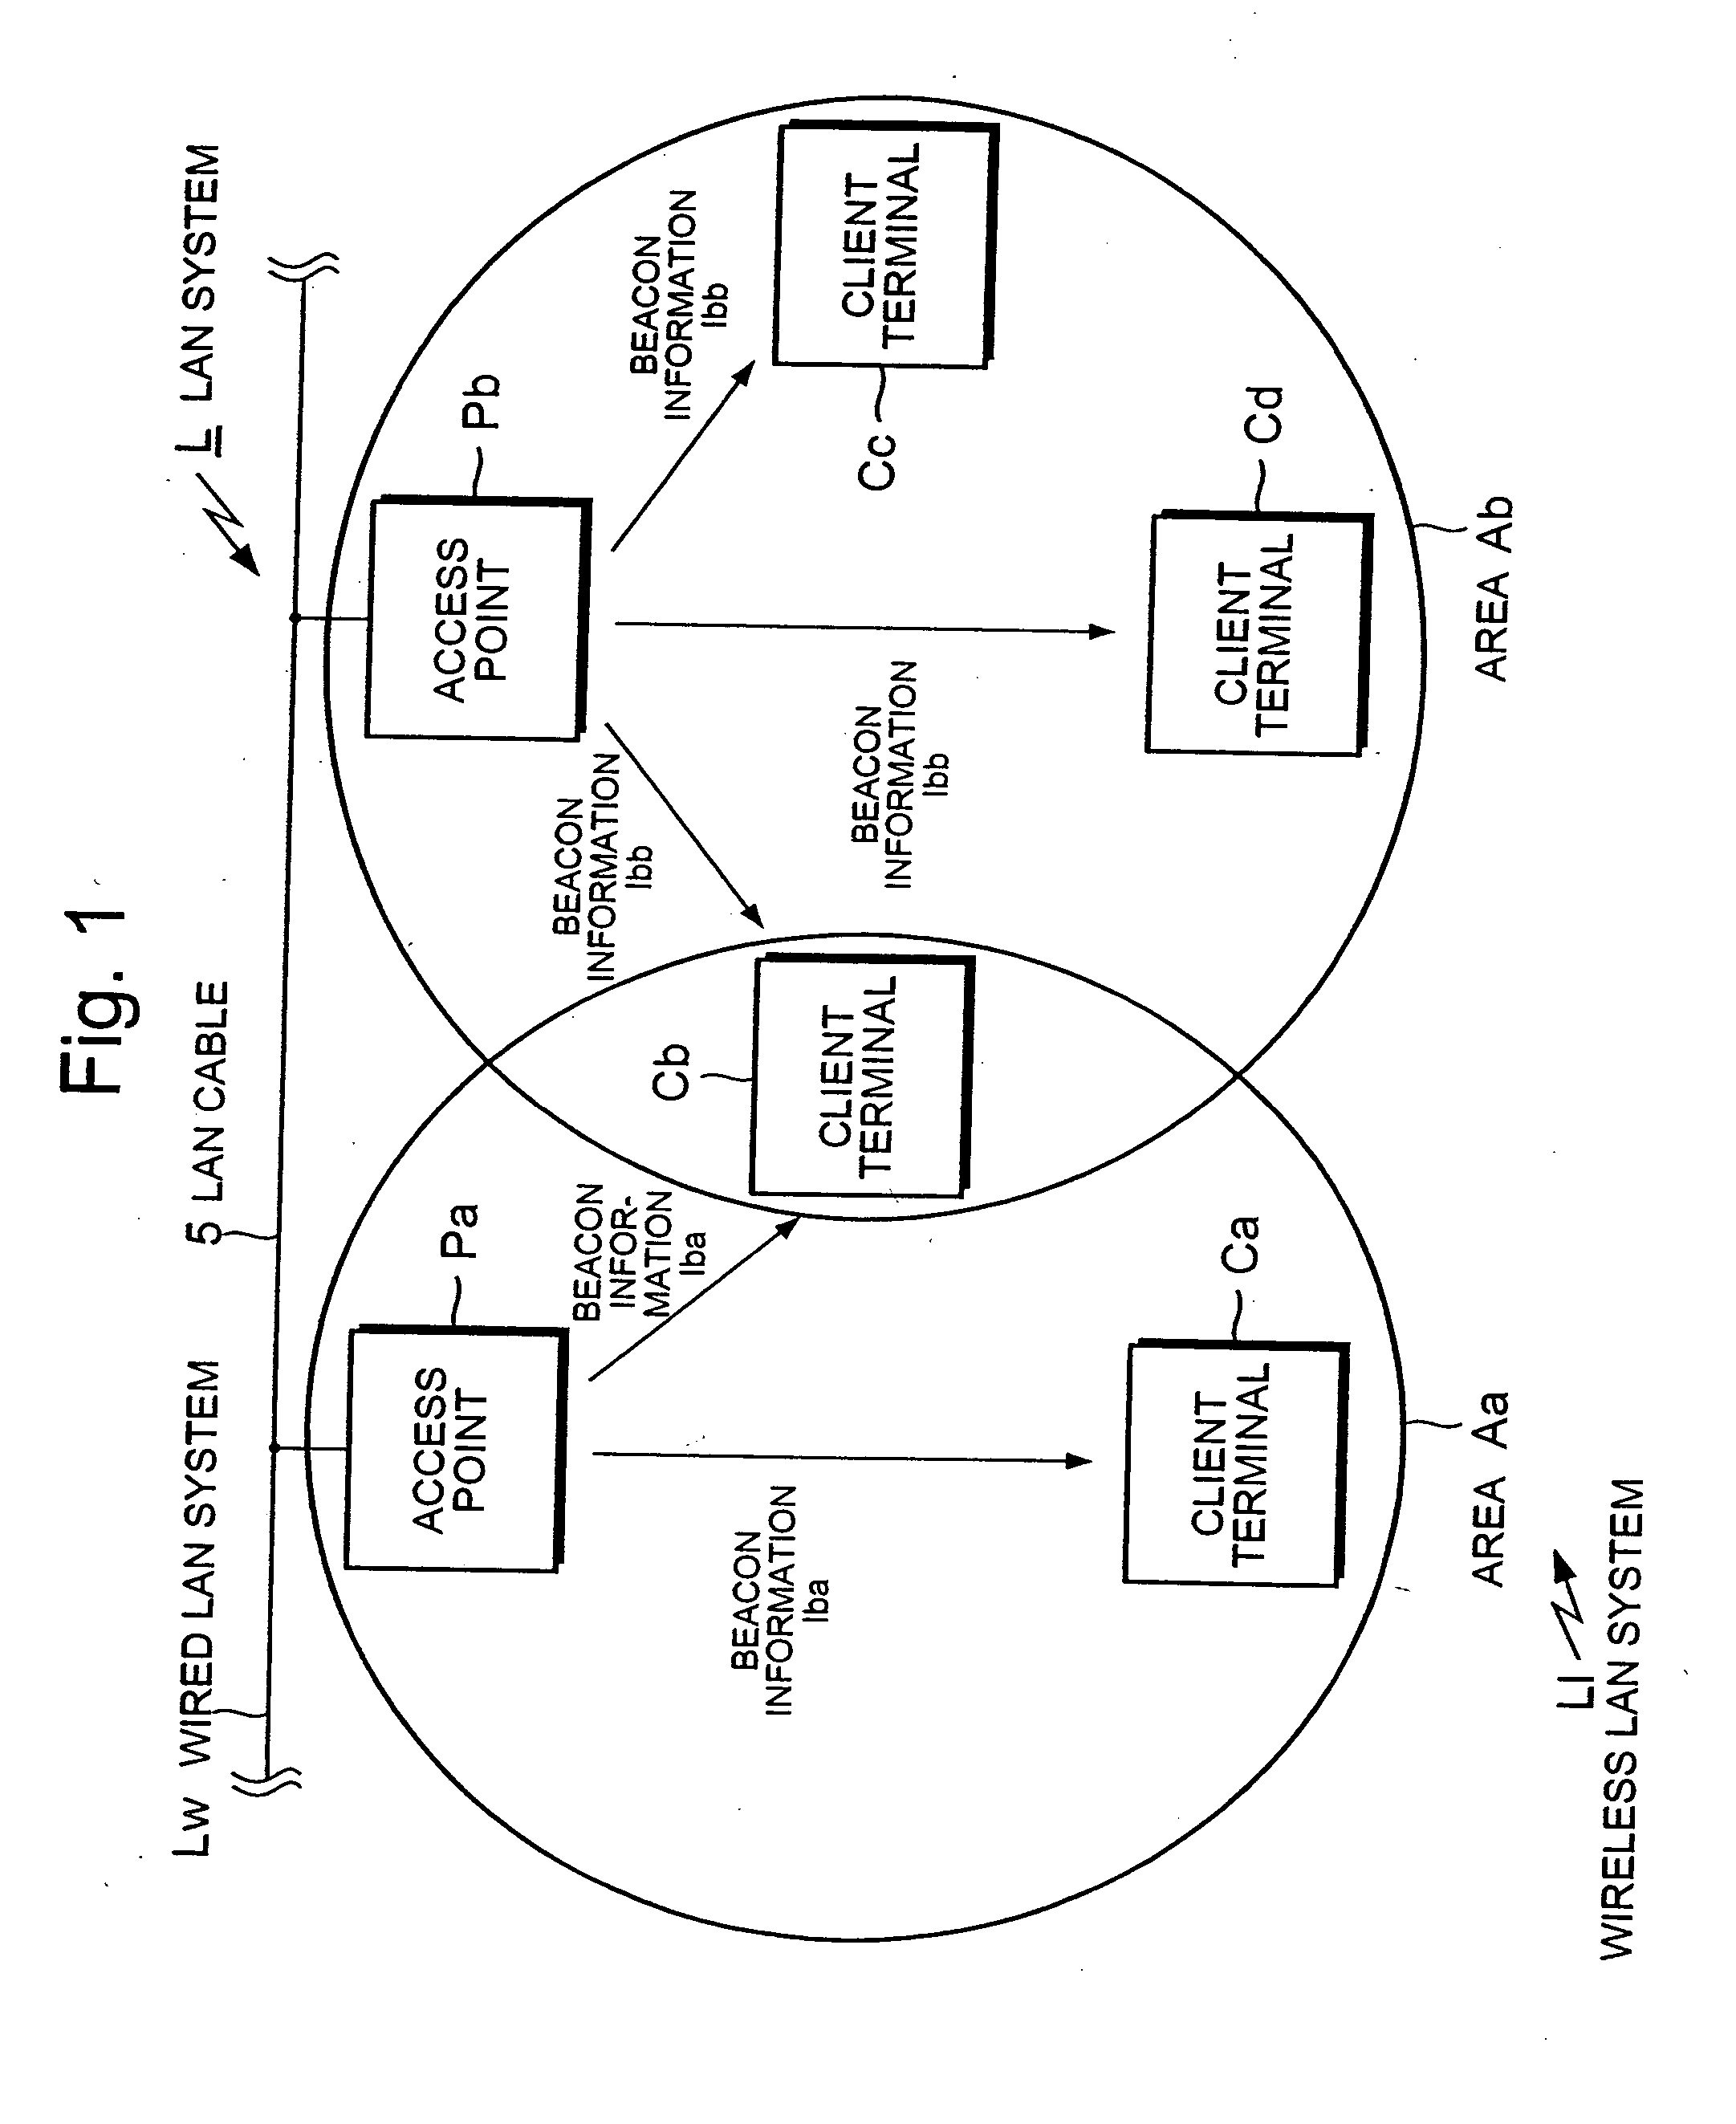 Wireless local area network system, fault recovery method, and recording medium stored therein a computer program executing the fault recovery process